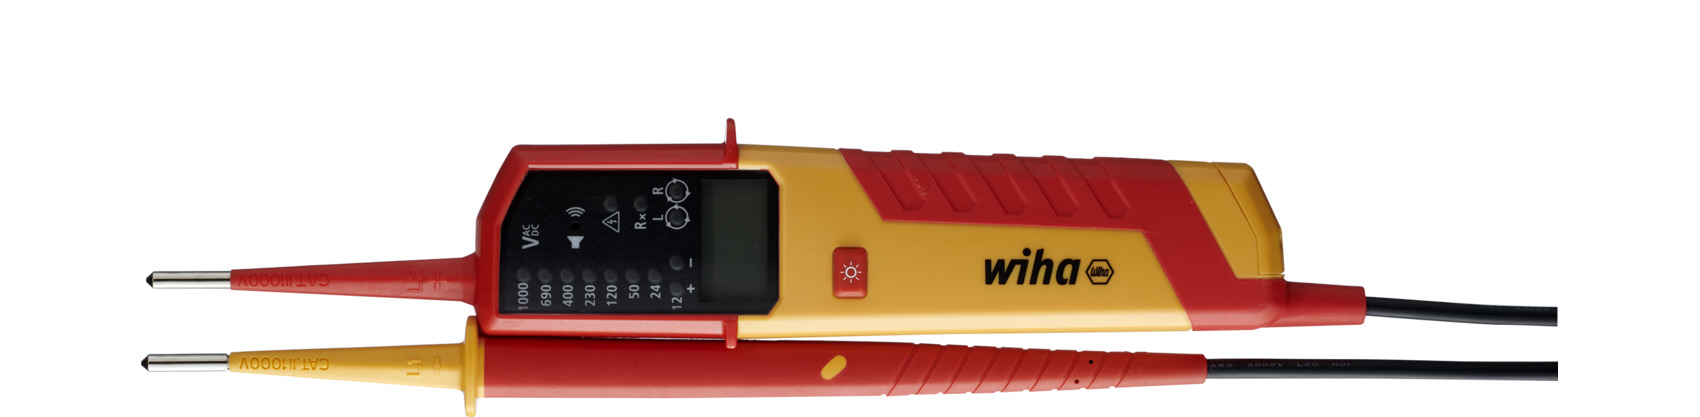 Wiha Voltage Tester And Continuity Tester 0,5 - 1.000 V AC, Cat IV/SB255-17